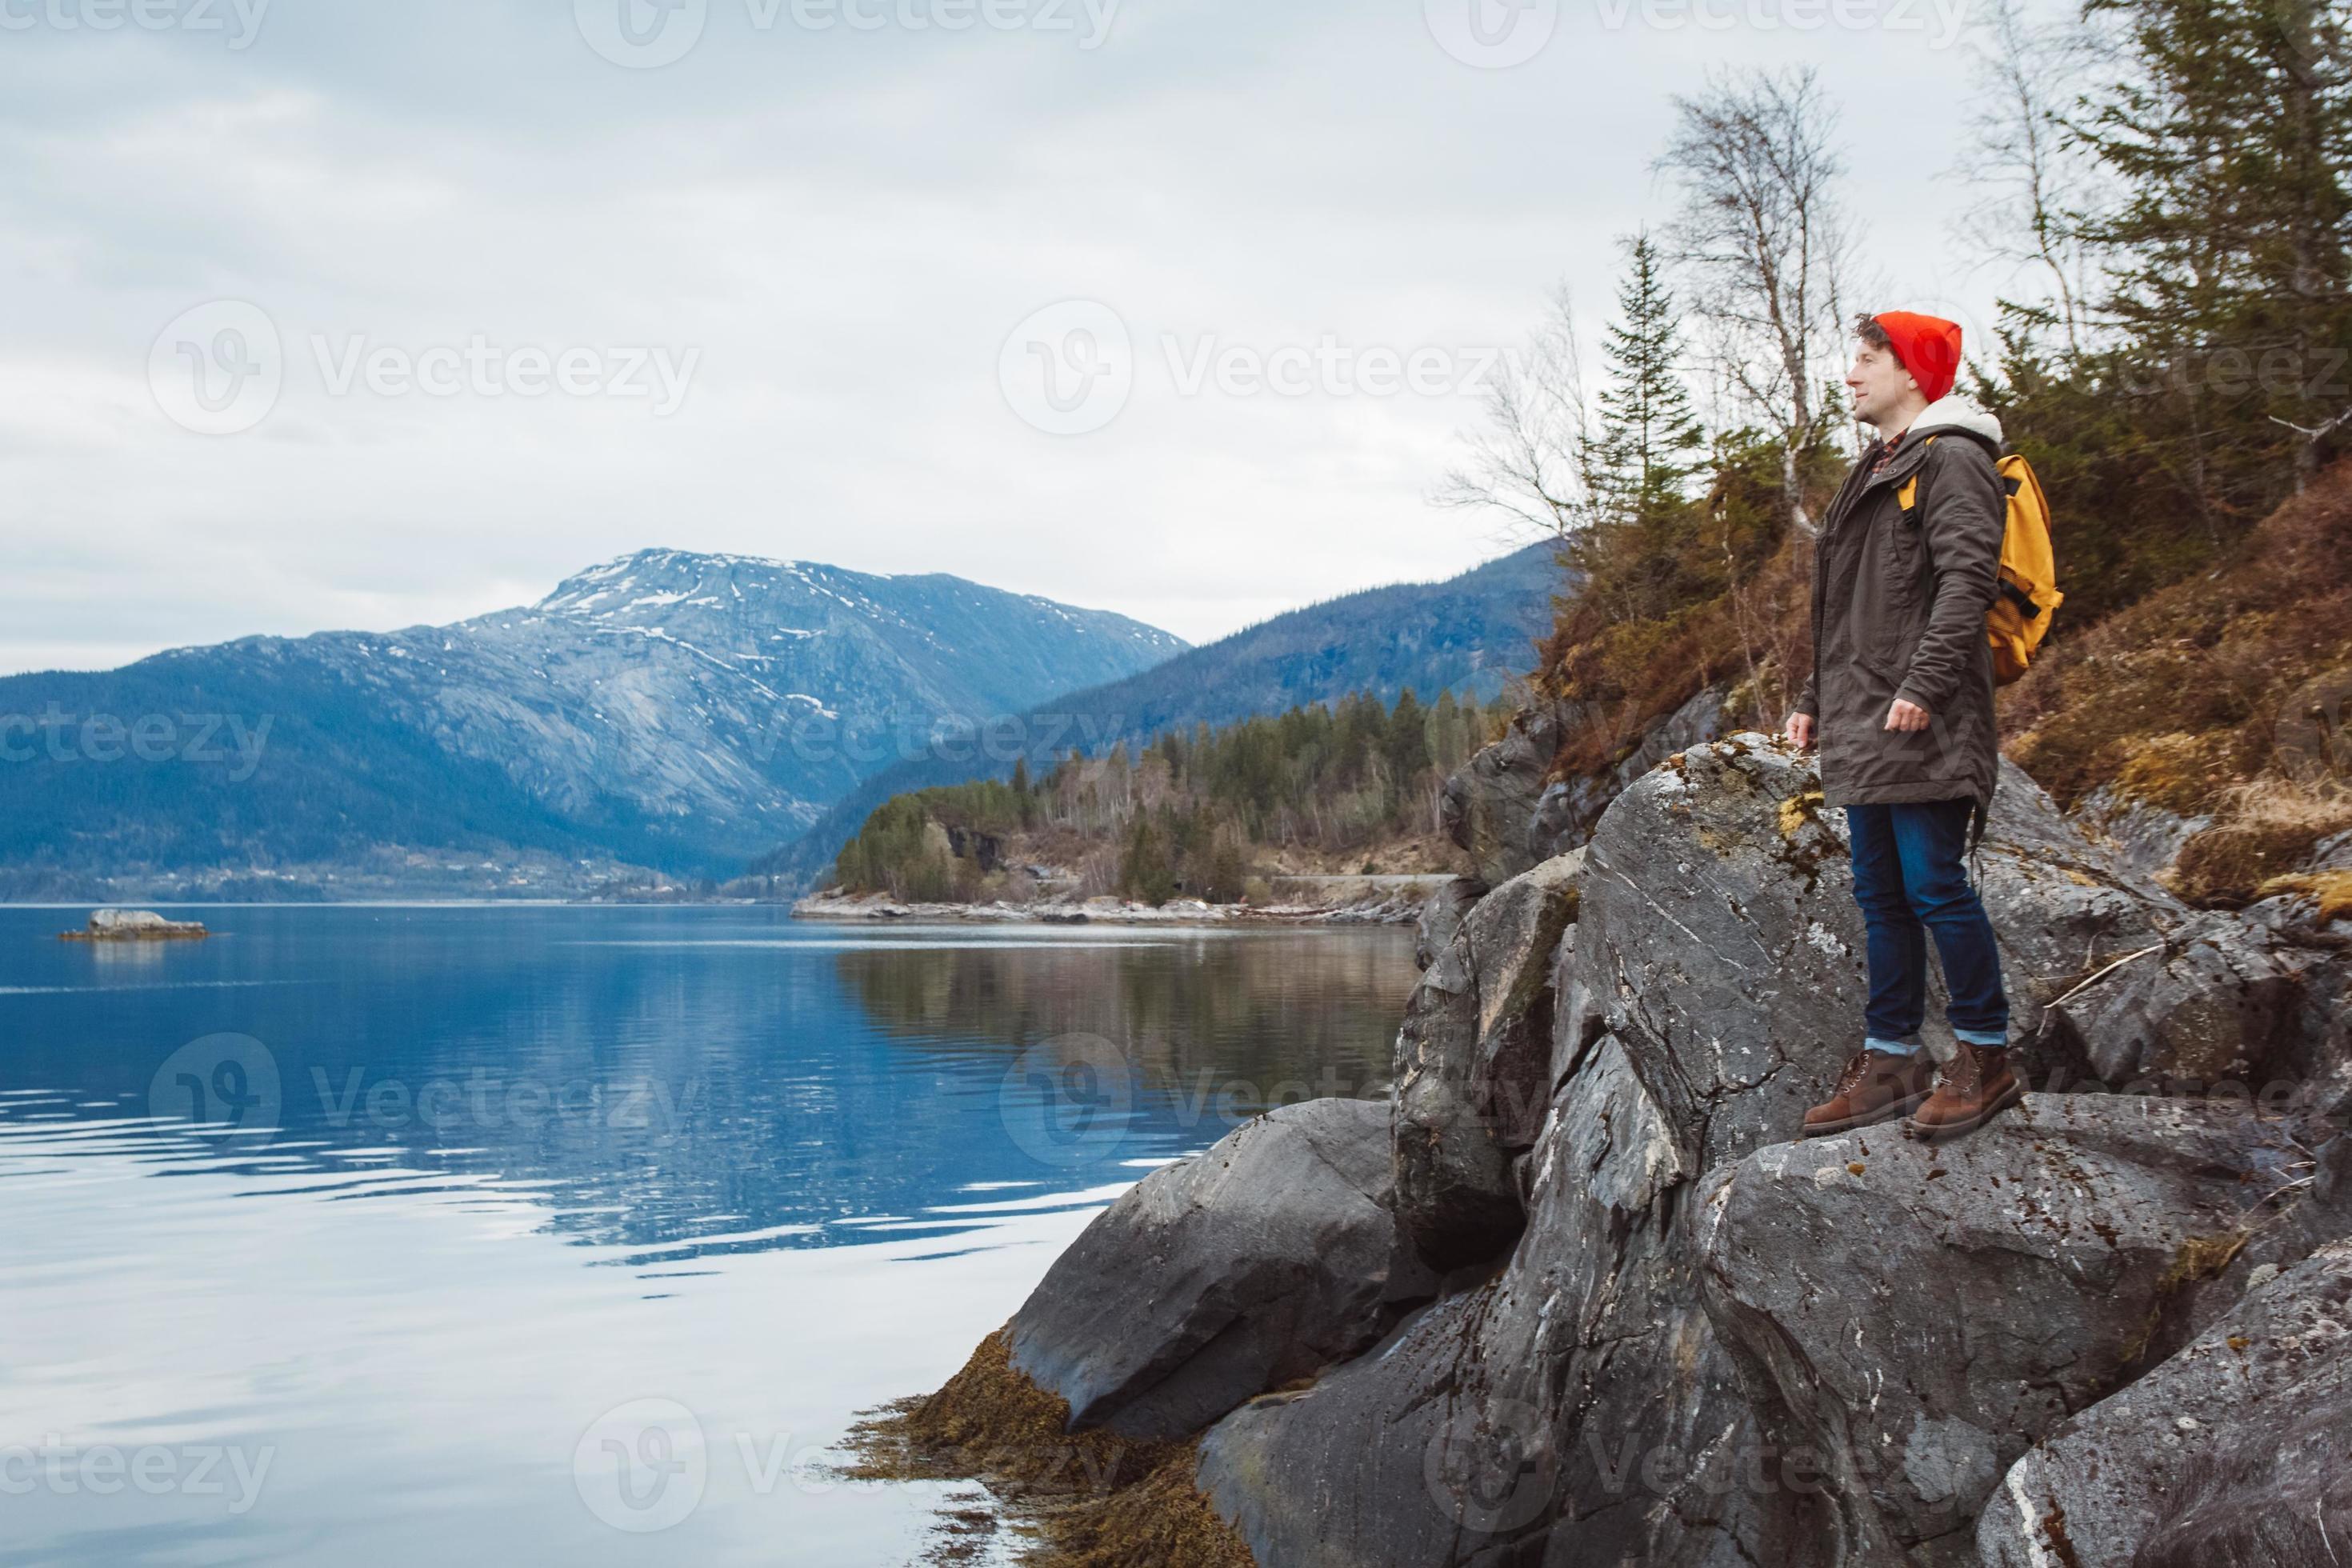 Young man with a yellow backpack wearing a red hat standing on a rock on the background of mountain and lake. Space for your text message or promotional content. Travel lifestyle concept photo